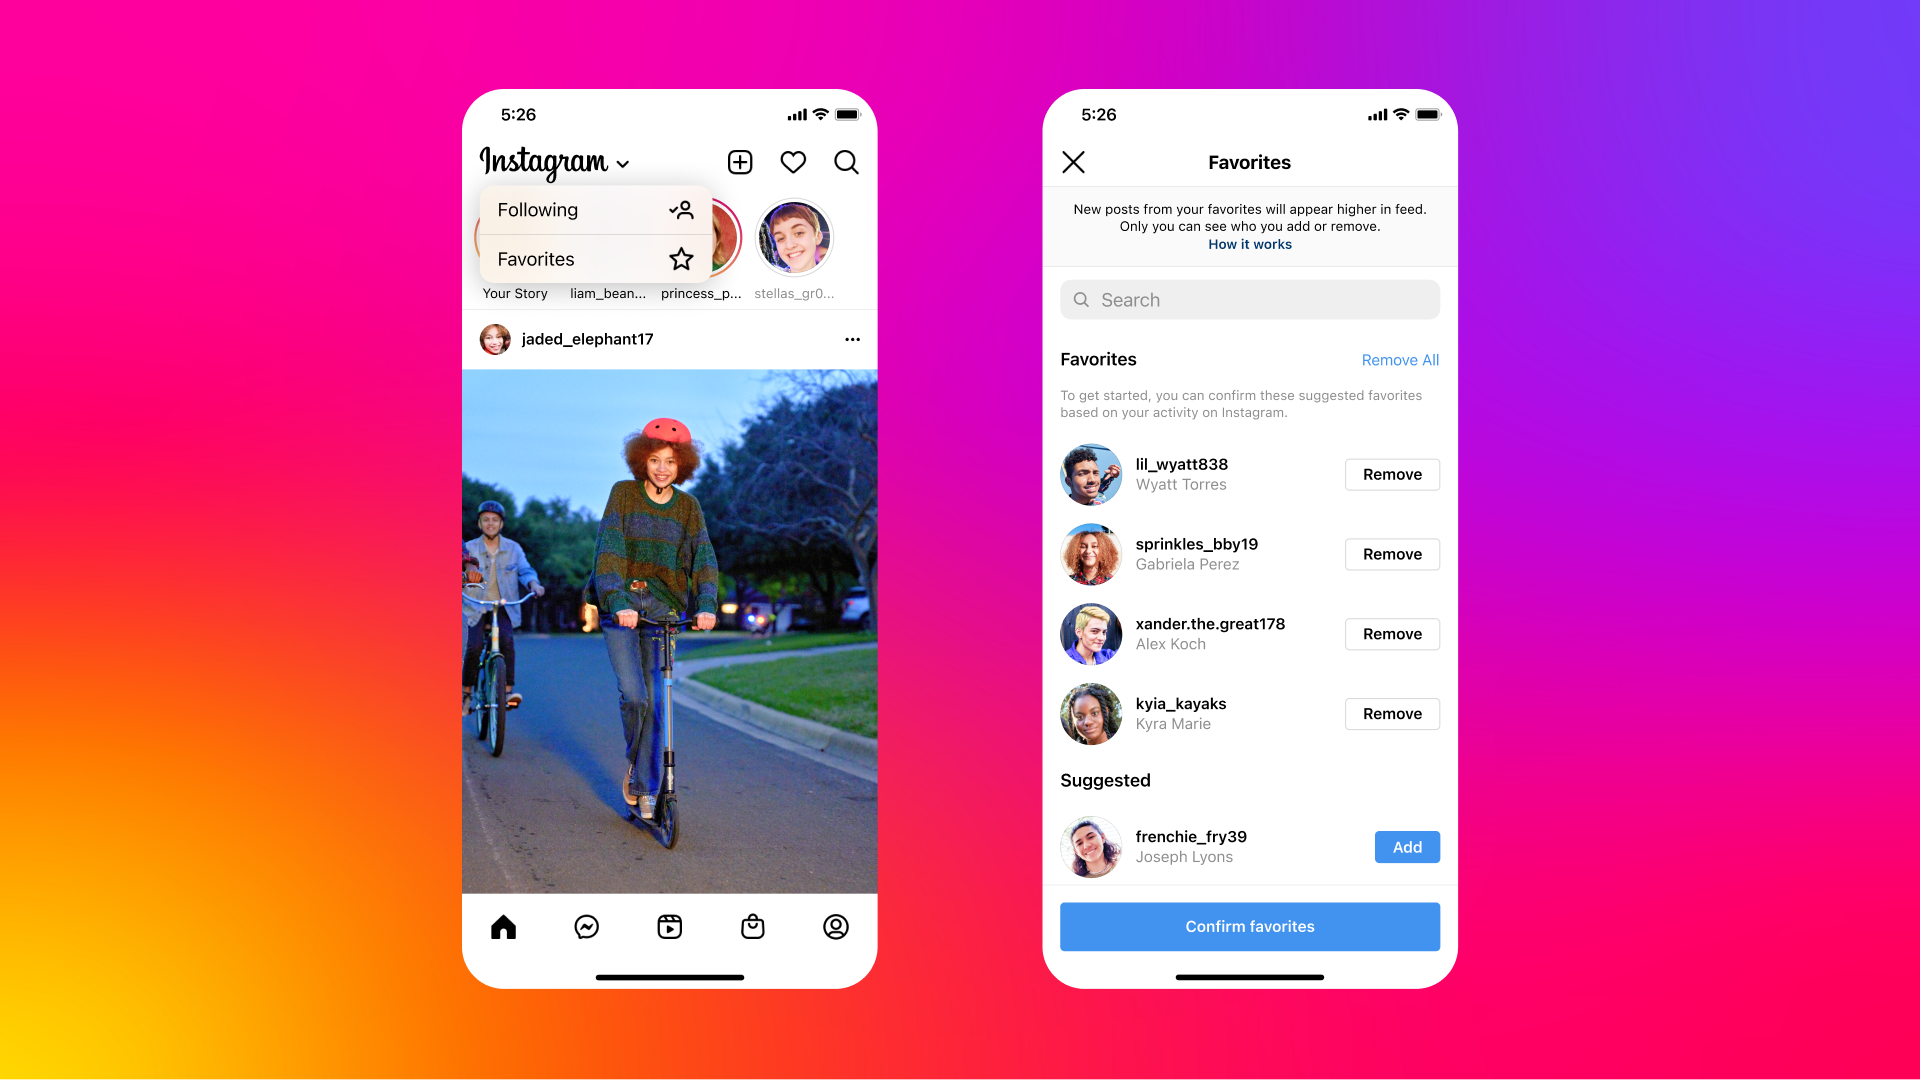 Instagram Introduces New Feature That Allows Users To Organize Their Feeds Into ‘Following’ And ‘Favorites’